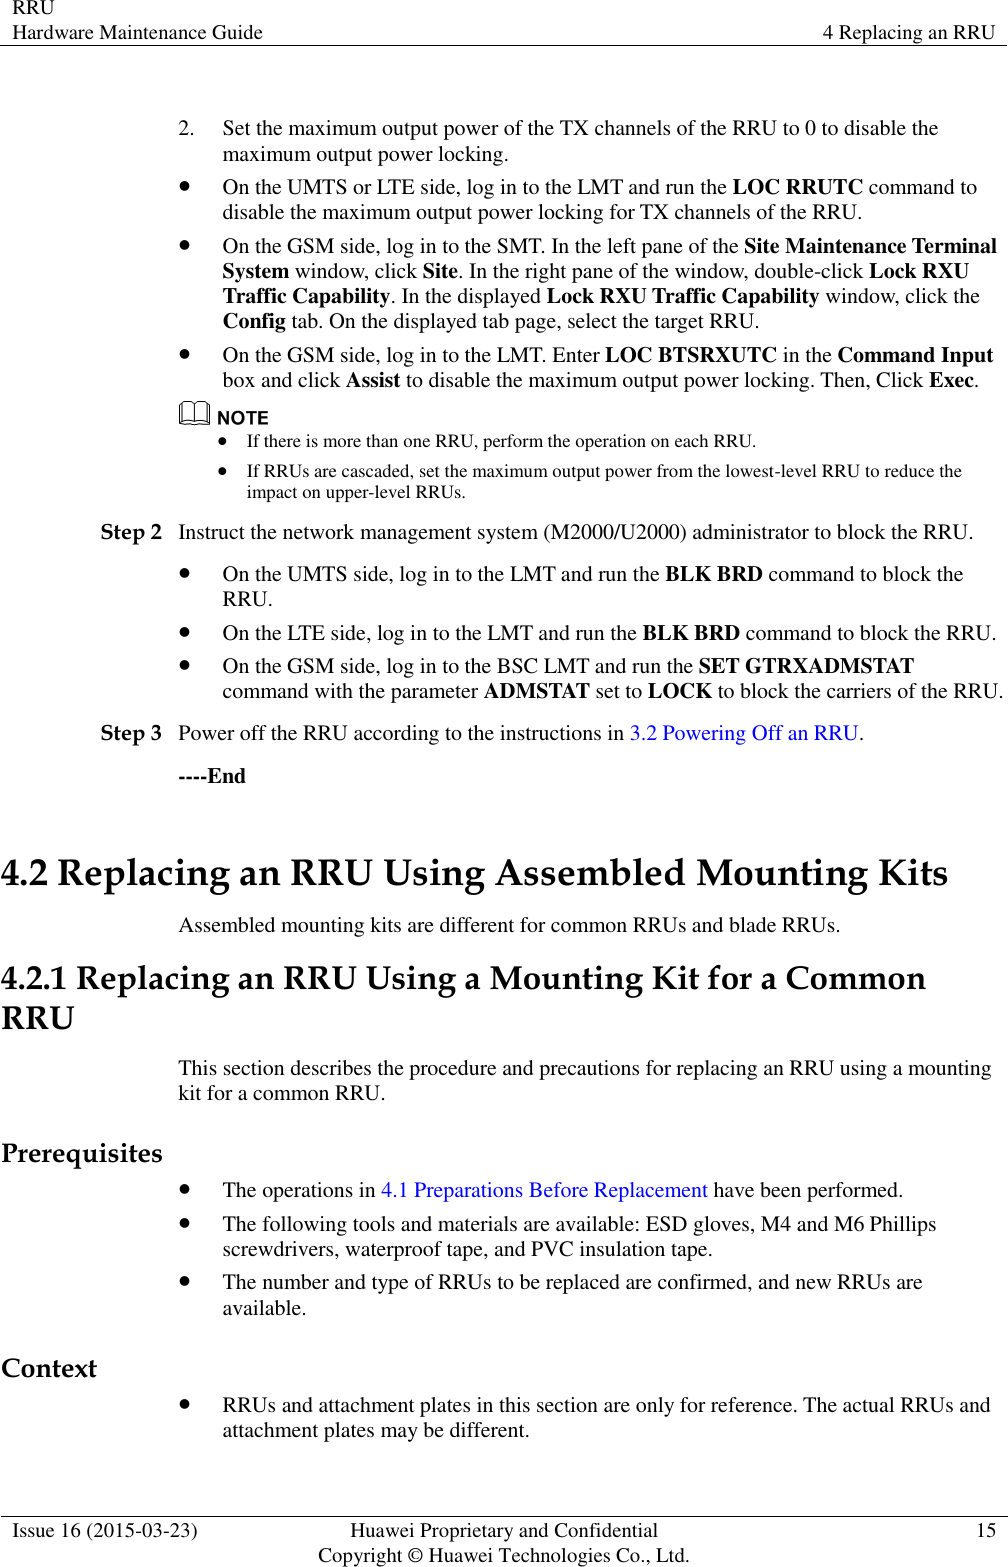 RRU Hardware Maintenance Guide 4 Replacing an RRU  Issue 16 (2015-03-23) Huawei Proprietary and Confidential                                     Copyright © Huawei Technologies Co., Ltd. 15   2. Set the maximum output power of the TX channels of the RRU to 0 to disable the maximum output power locking.  On the UMTS or LTE side, log in to the LMT and run the LOC RRUTC command to disable the maximum output power locking for TX channels of the RRU.  On the GSM side, log in to the SMT. In the left pane of the Site Maintenance Terminal System window, click Site. In the right pane of the window, double-click Lock RXU Traffic Capability. In the displayed Lock RXU Traffic Capability window, click the Config tab. On the displayed tab page, select the target RRU.  On the GSM side, log in to the LMT. Enter LOC BTSRXUTC in the Command Input box and click Assist to disable the maximum output power locking. Then, Click Exec.   If there is more than one RRU, perform the operation on each RRU.  If RRUs are cascaded, set the maximum output power from the lowest-level RRU to reduce the impact on upper-level RRUs. Step 2 Instruct the network management system (M2000/U2000) administrator to block the RRU.  On the UMTS side, log in to the LMT and run the BLK BRD command to block the RRU.  On the LTE side, log in to the LMT and run the BLK BRD command to block the RRU.  On the GSM side, log in to the BSC LMT and run the SET GTRXADMSTAT command with the parameter ADMSTAT set to LOCK to block the carriers of the RRU. Step 3 Power off the RRU according to the instructions in 3.2 Powering Off an RRU. ----End 4.2 Replacing an RRU Using Assembled Mounting Kits Assembled mounting kits are different for common RRUs and blade RRUs. 4.2.1 Replacing an RRU Using a Mounting Kit for a Common RRU This section describes the procedure and precautions for replacing an RRU using a mounting kit for a common RRU. Prerequisites  The operations in 4.1 Preparations Before Replacement have been performed.  The following tools and materials are available: ESD gloves, M4 and M6 Phillips screwdrivers, waterproof tape, and PVC insulation tape.  The number and type of RRUs to be replaced are confirmed, and new RRUs are available. Context  RRUs and attachment plates in this section are only for reference. The actual RRUs and attachment plates may be different. 